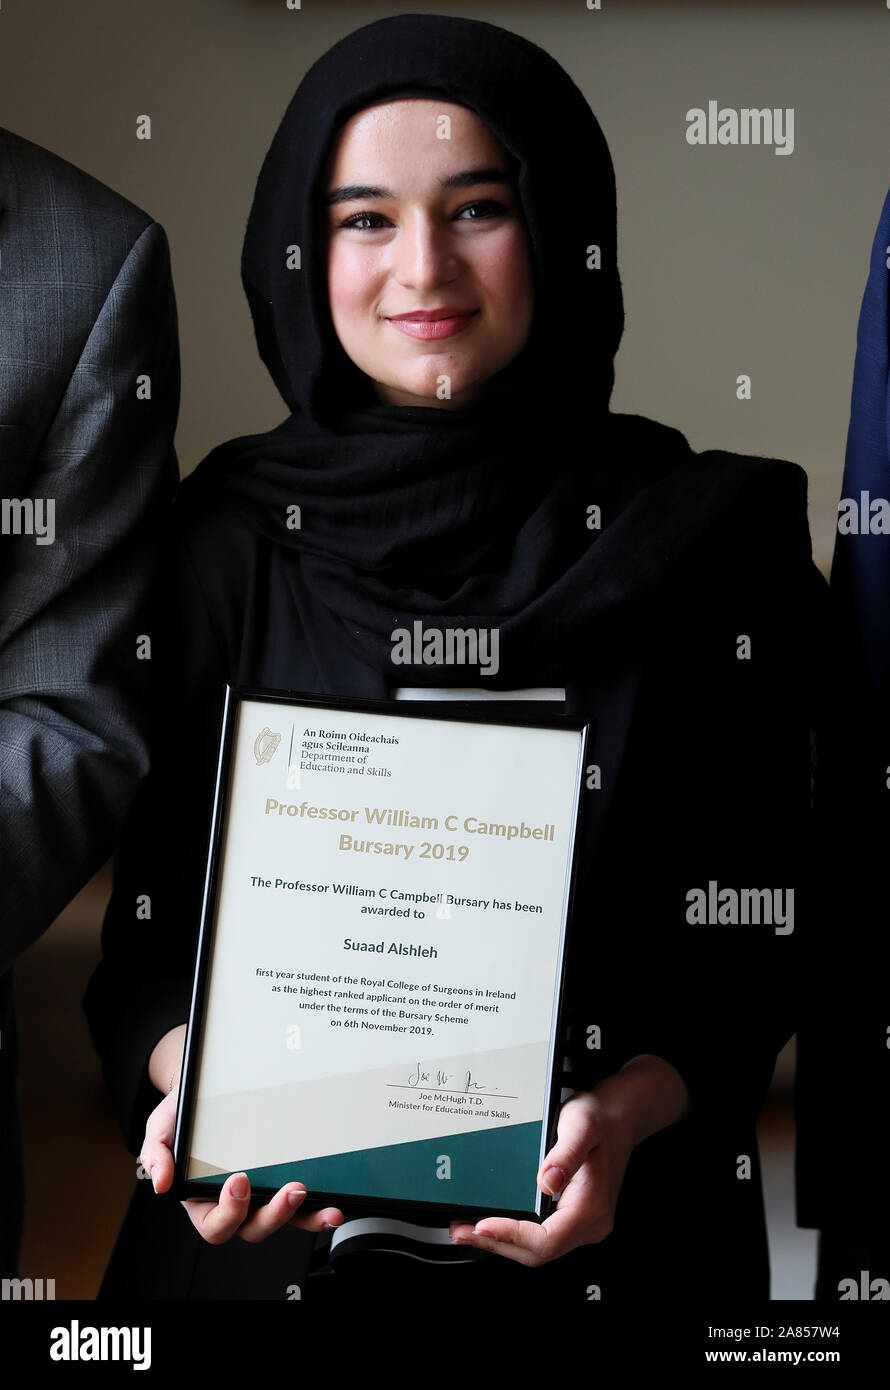 RCSI medical student Suaad Alshleh who was presented with the inaugral Professor William C Campbell Bursary at the Royal College of Surgeons Ireland in Dublin. Stock Photo